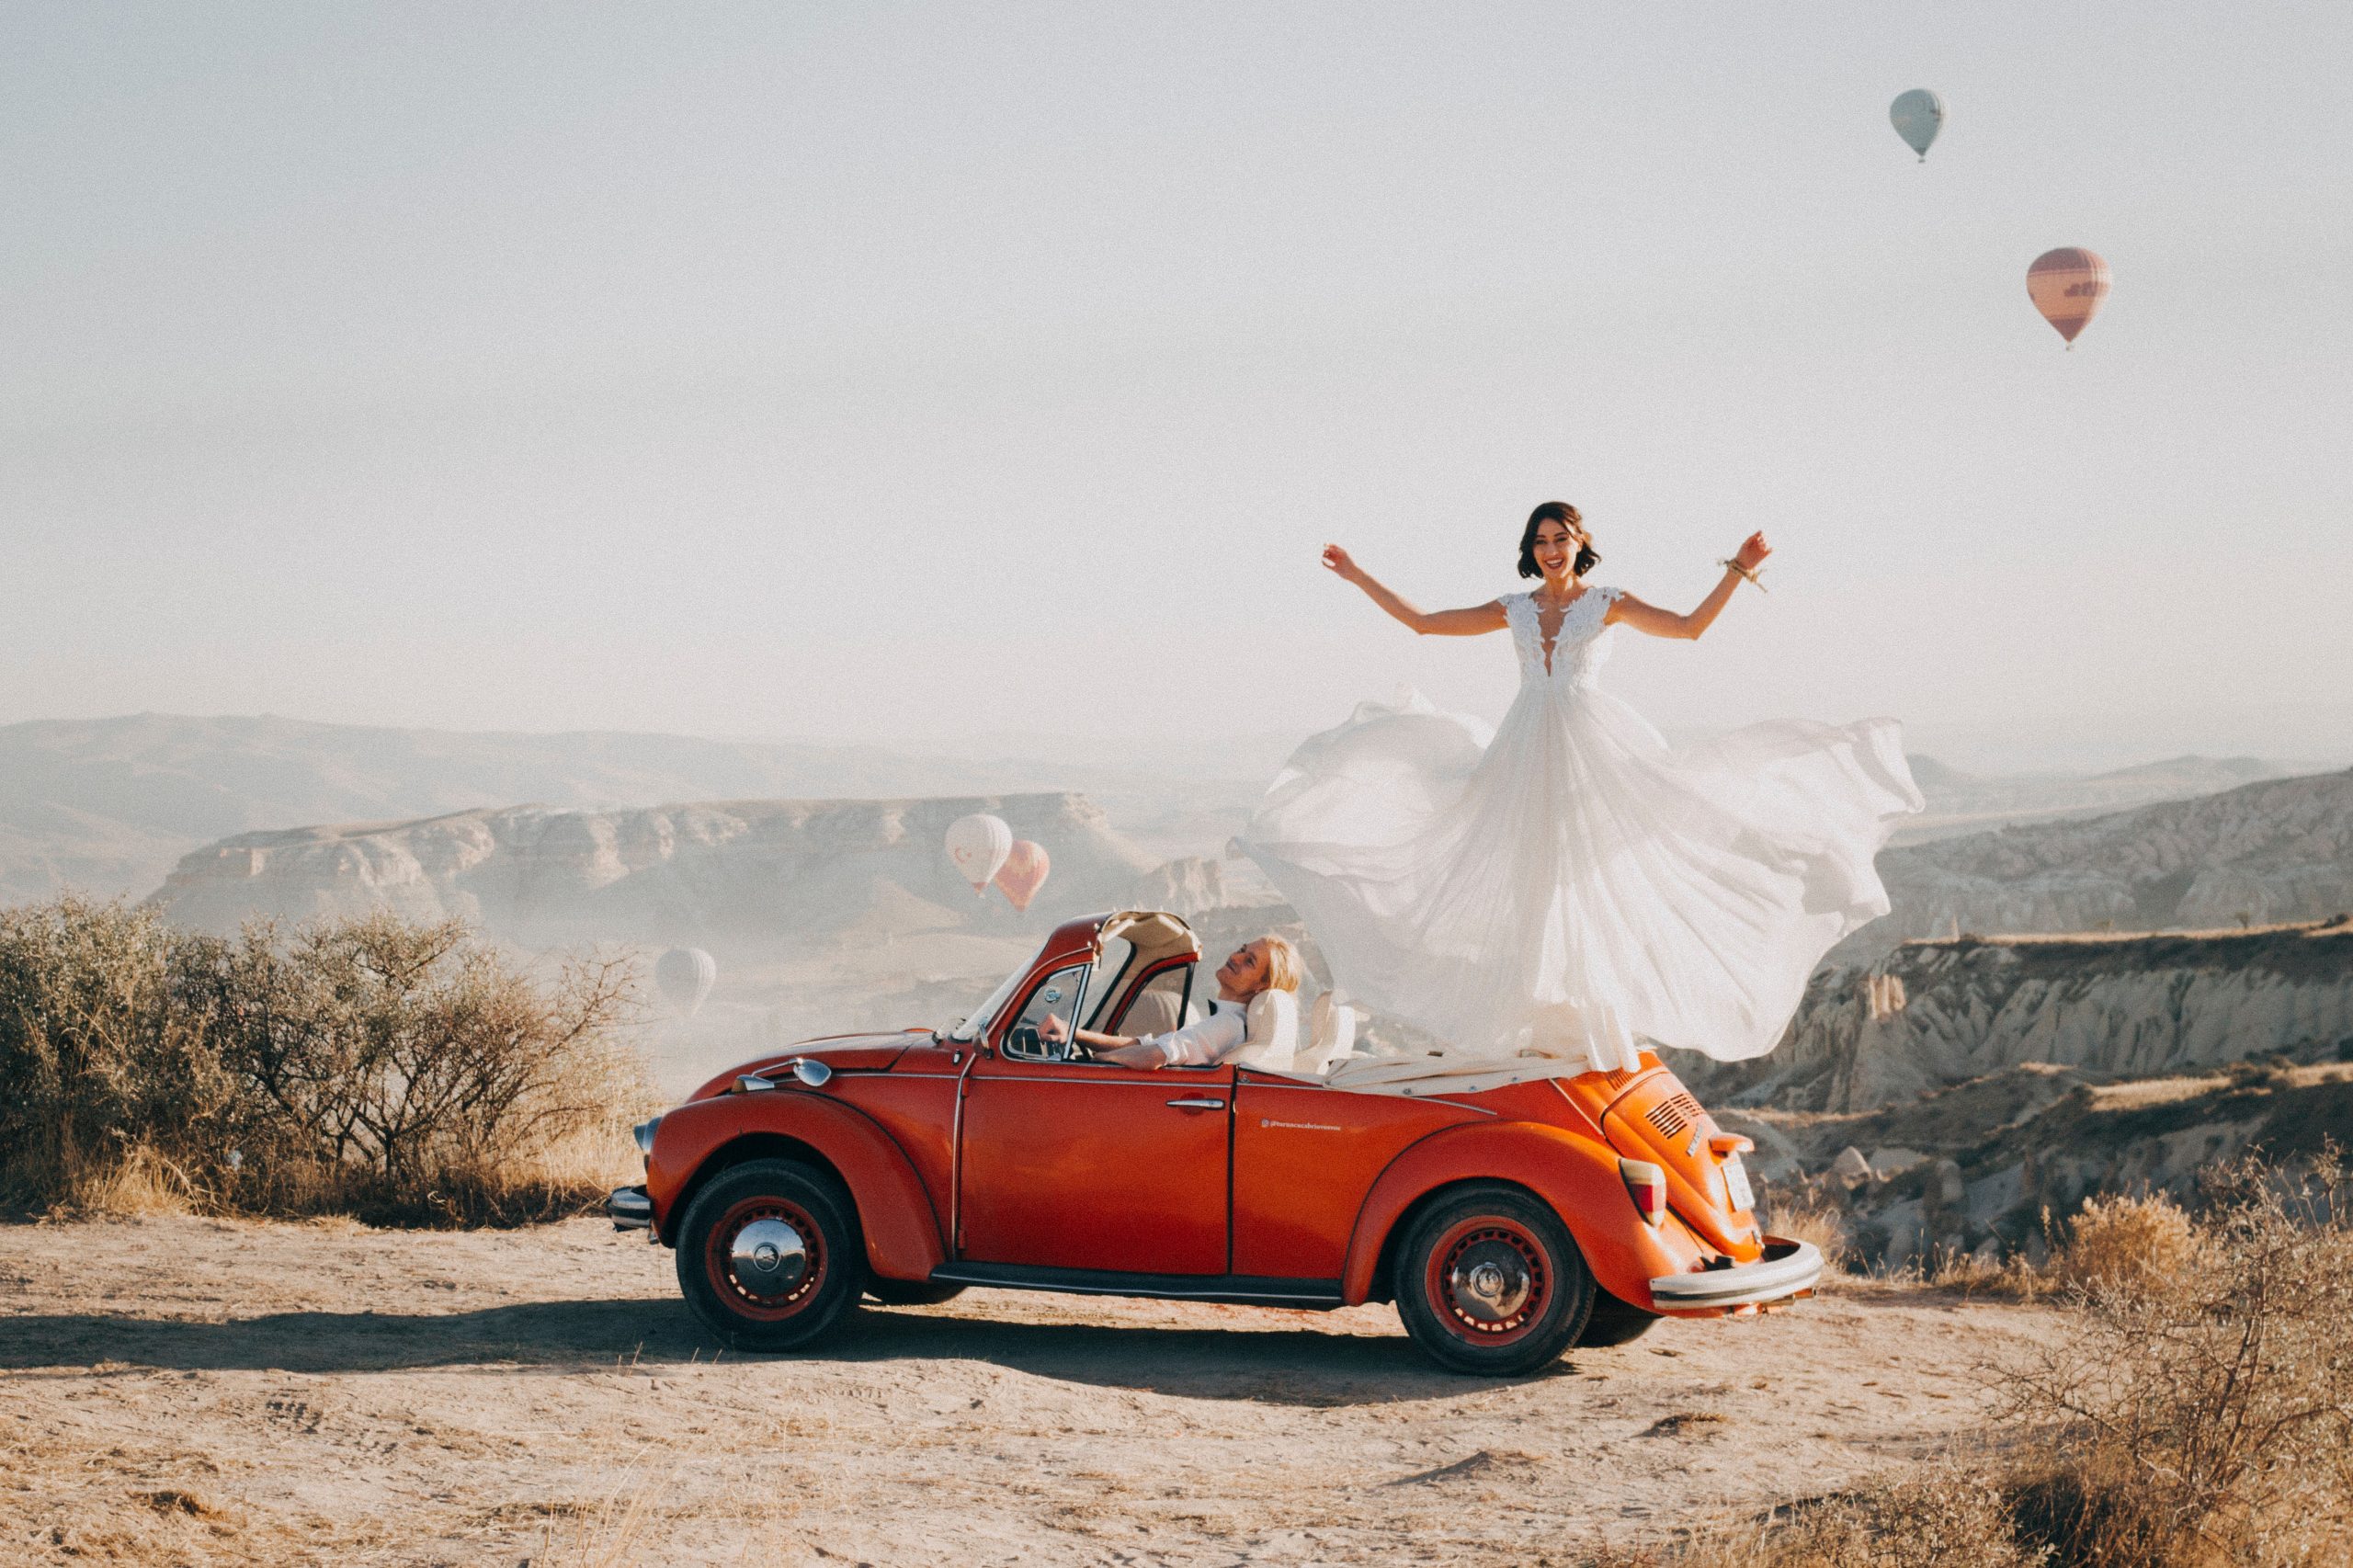 How to Choose the Perfect Destination Wedding Planner for Your Dream Wedding?